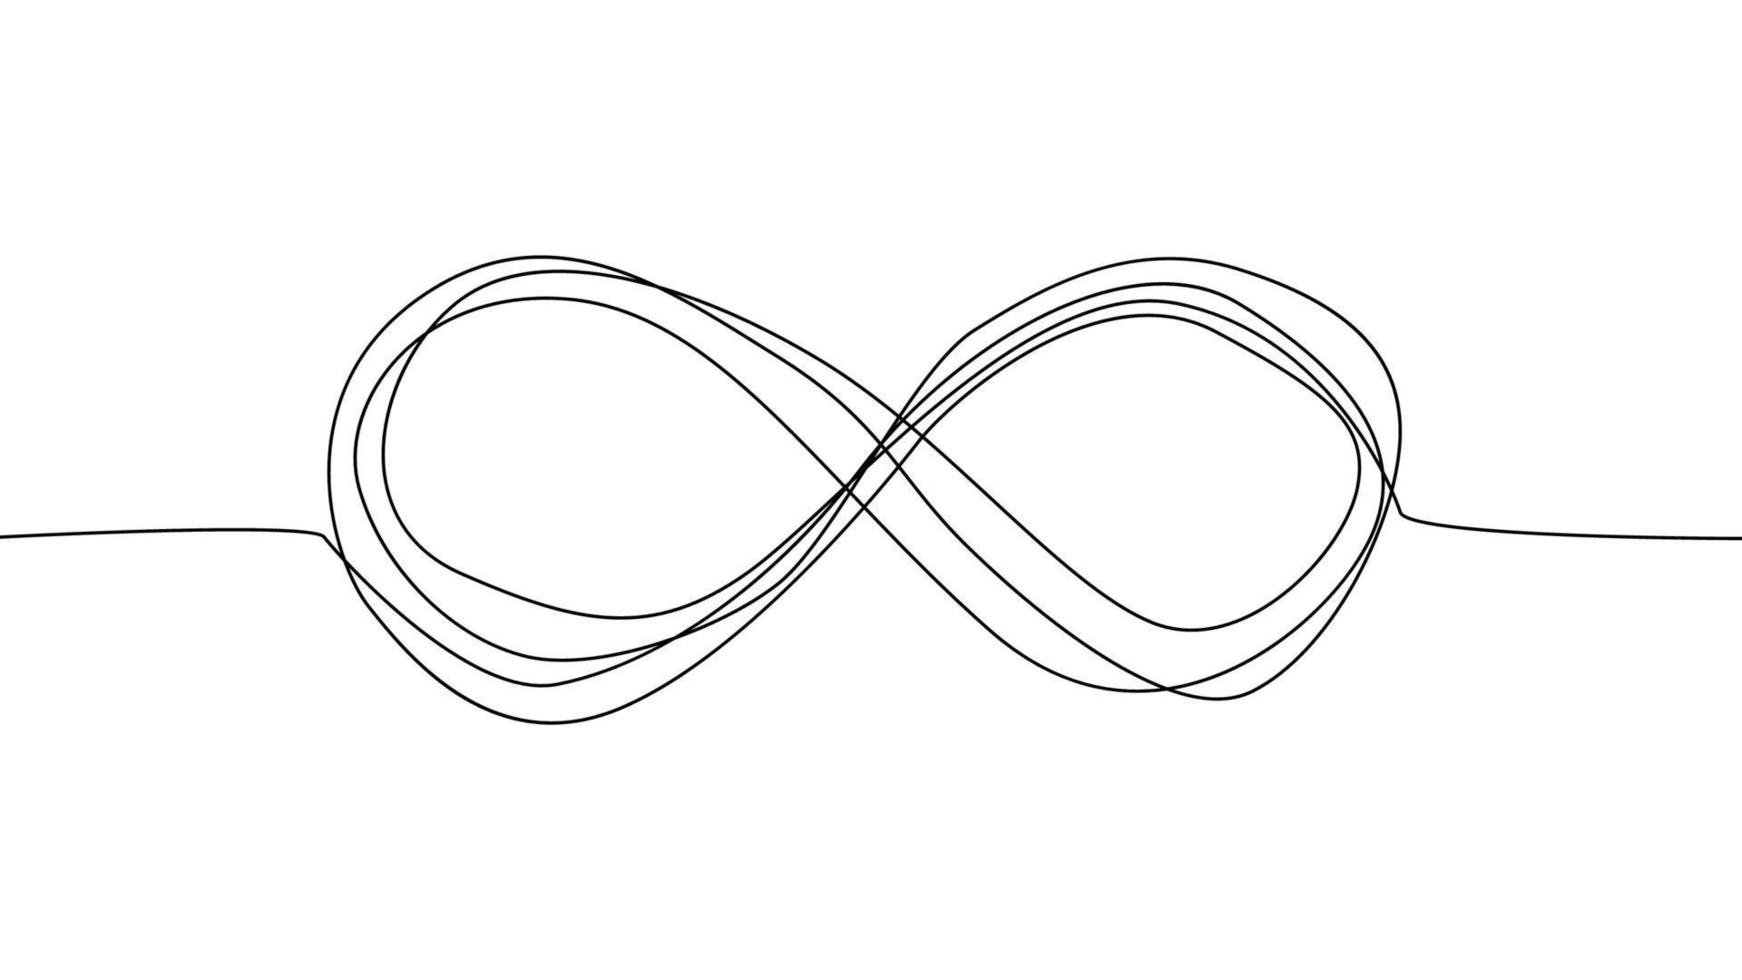 Infinity eternity symbol in variations set design with hand drawn doodle style vector